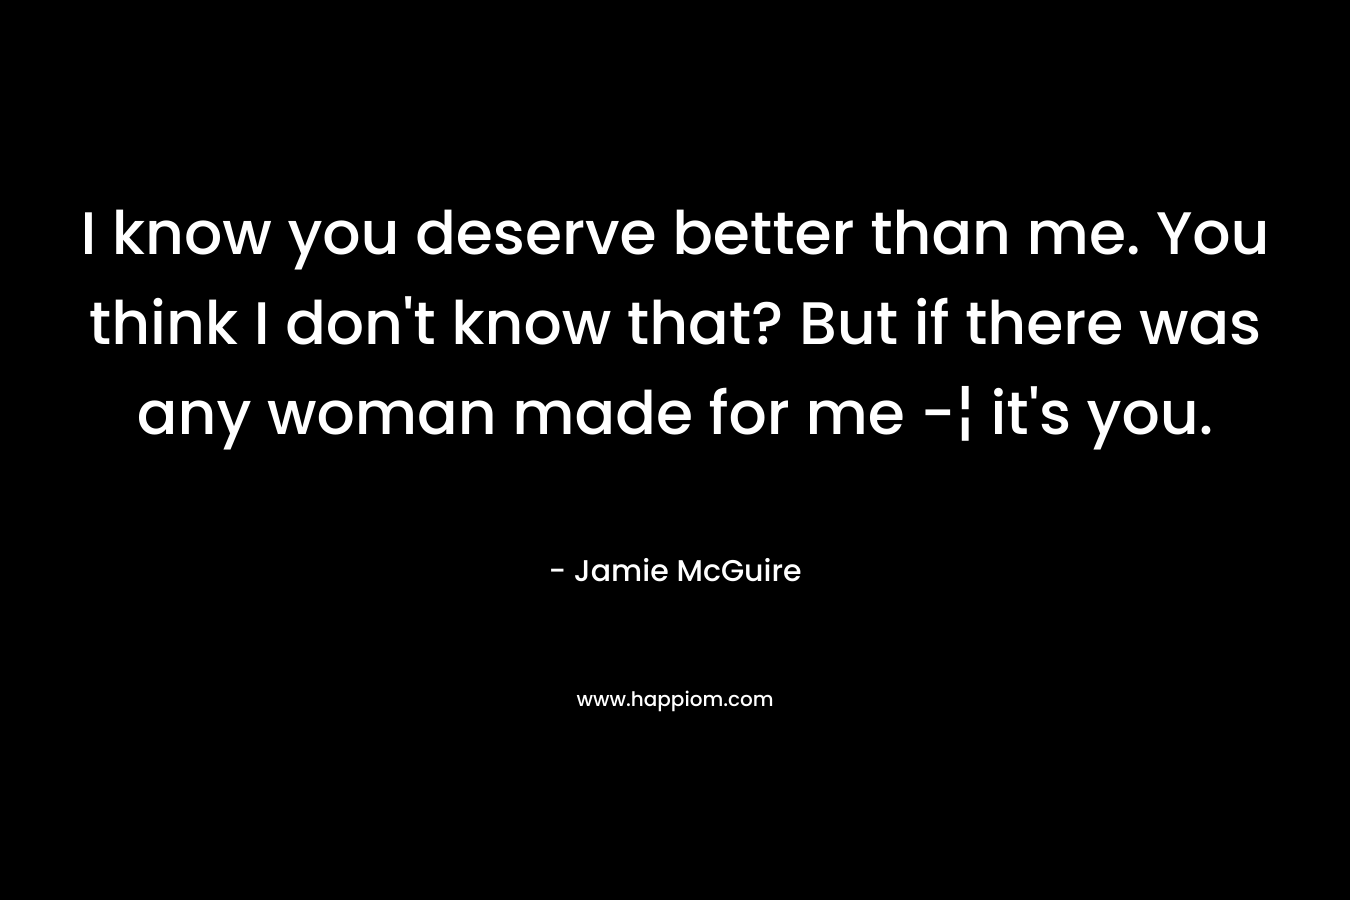 I know you deserve better than me. You think I don’t know that? But if there was any woman made for me -¦ it’s you. – Jamie McGuire